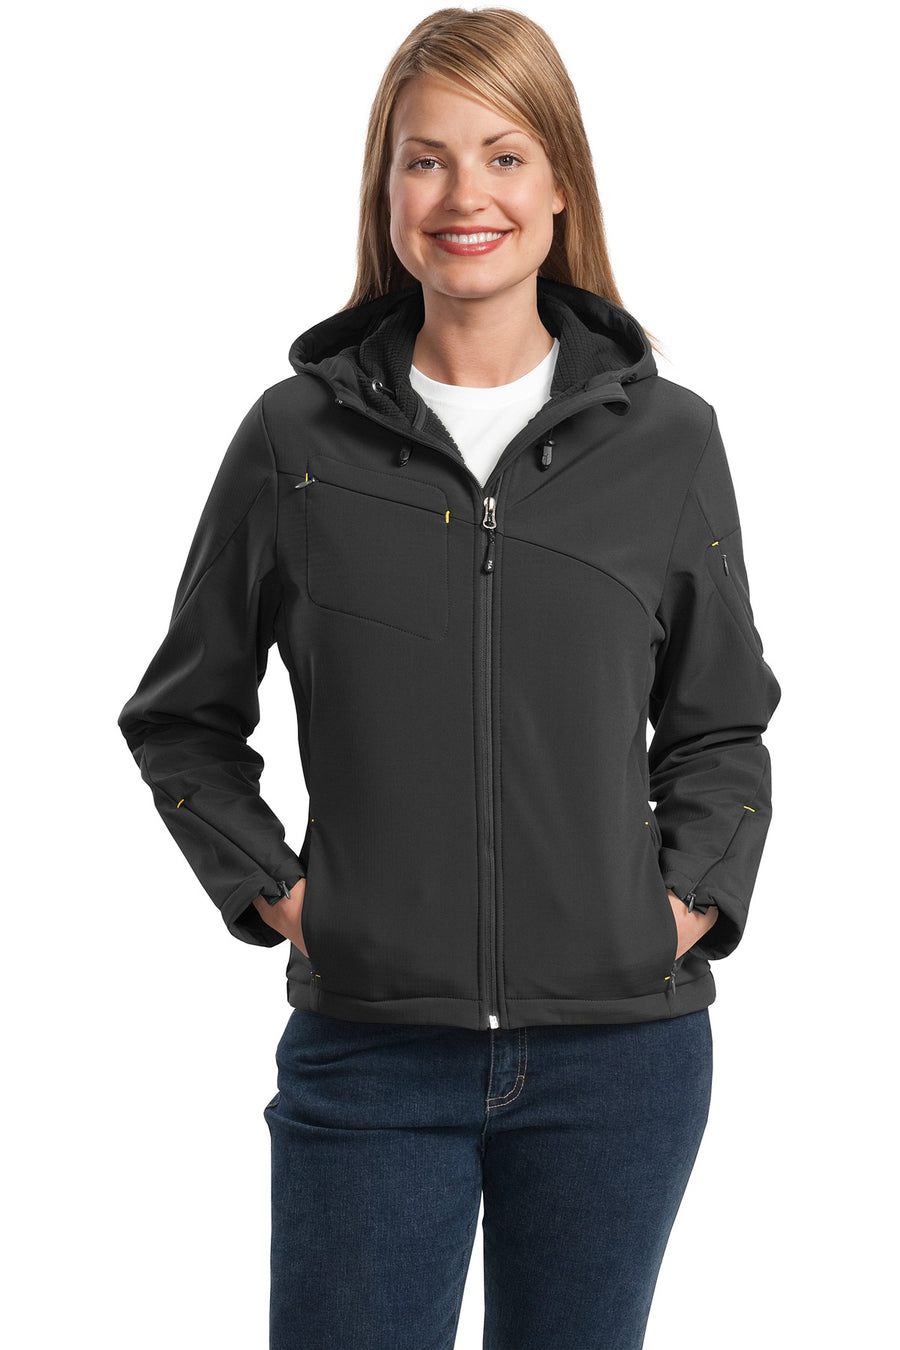 Port Authority Textured Hooded Soft Shell Jacket.